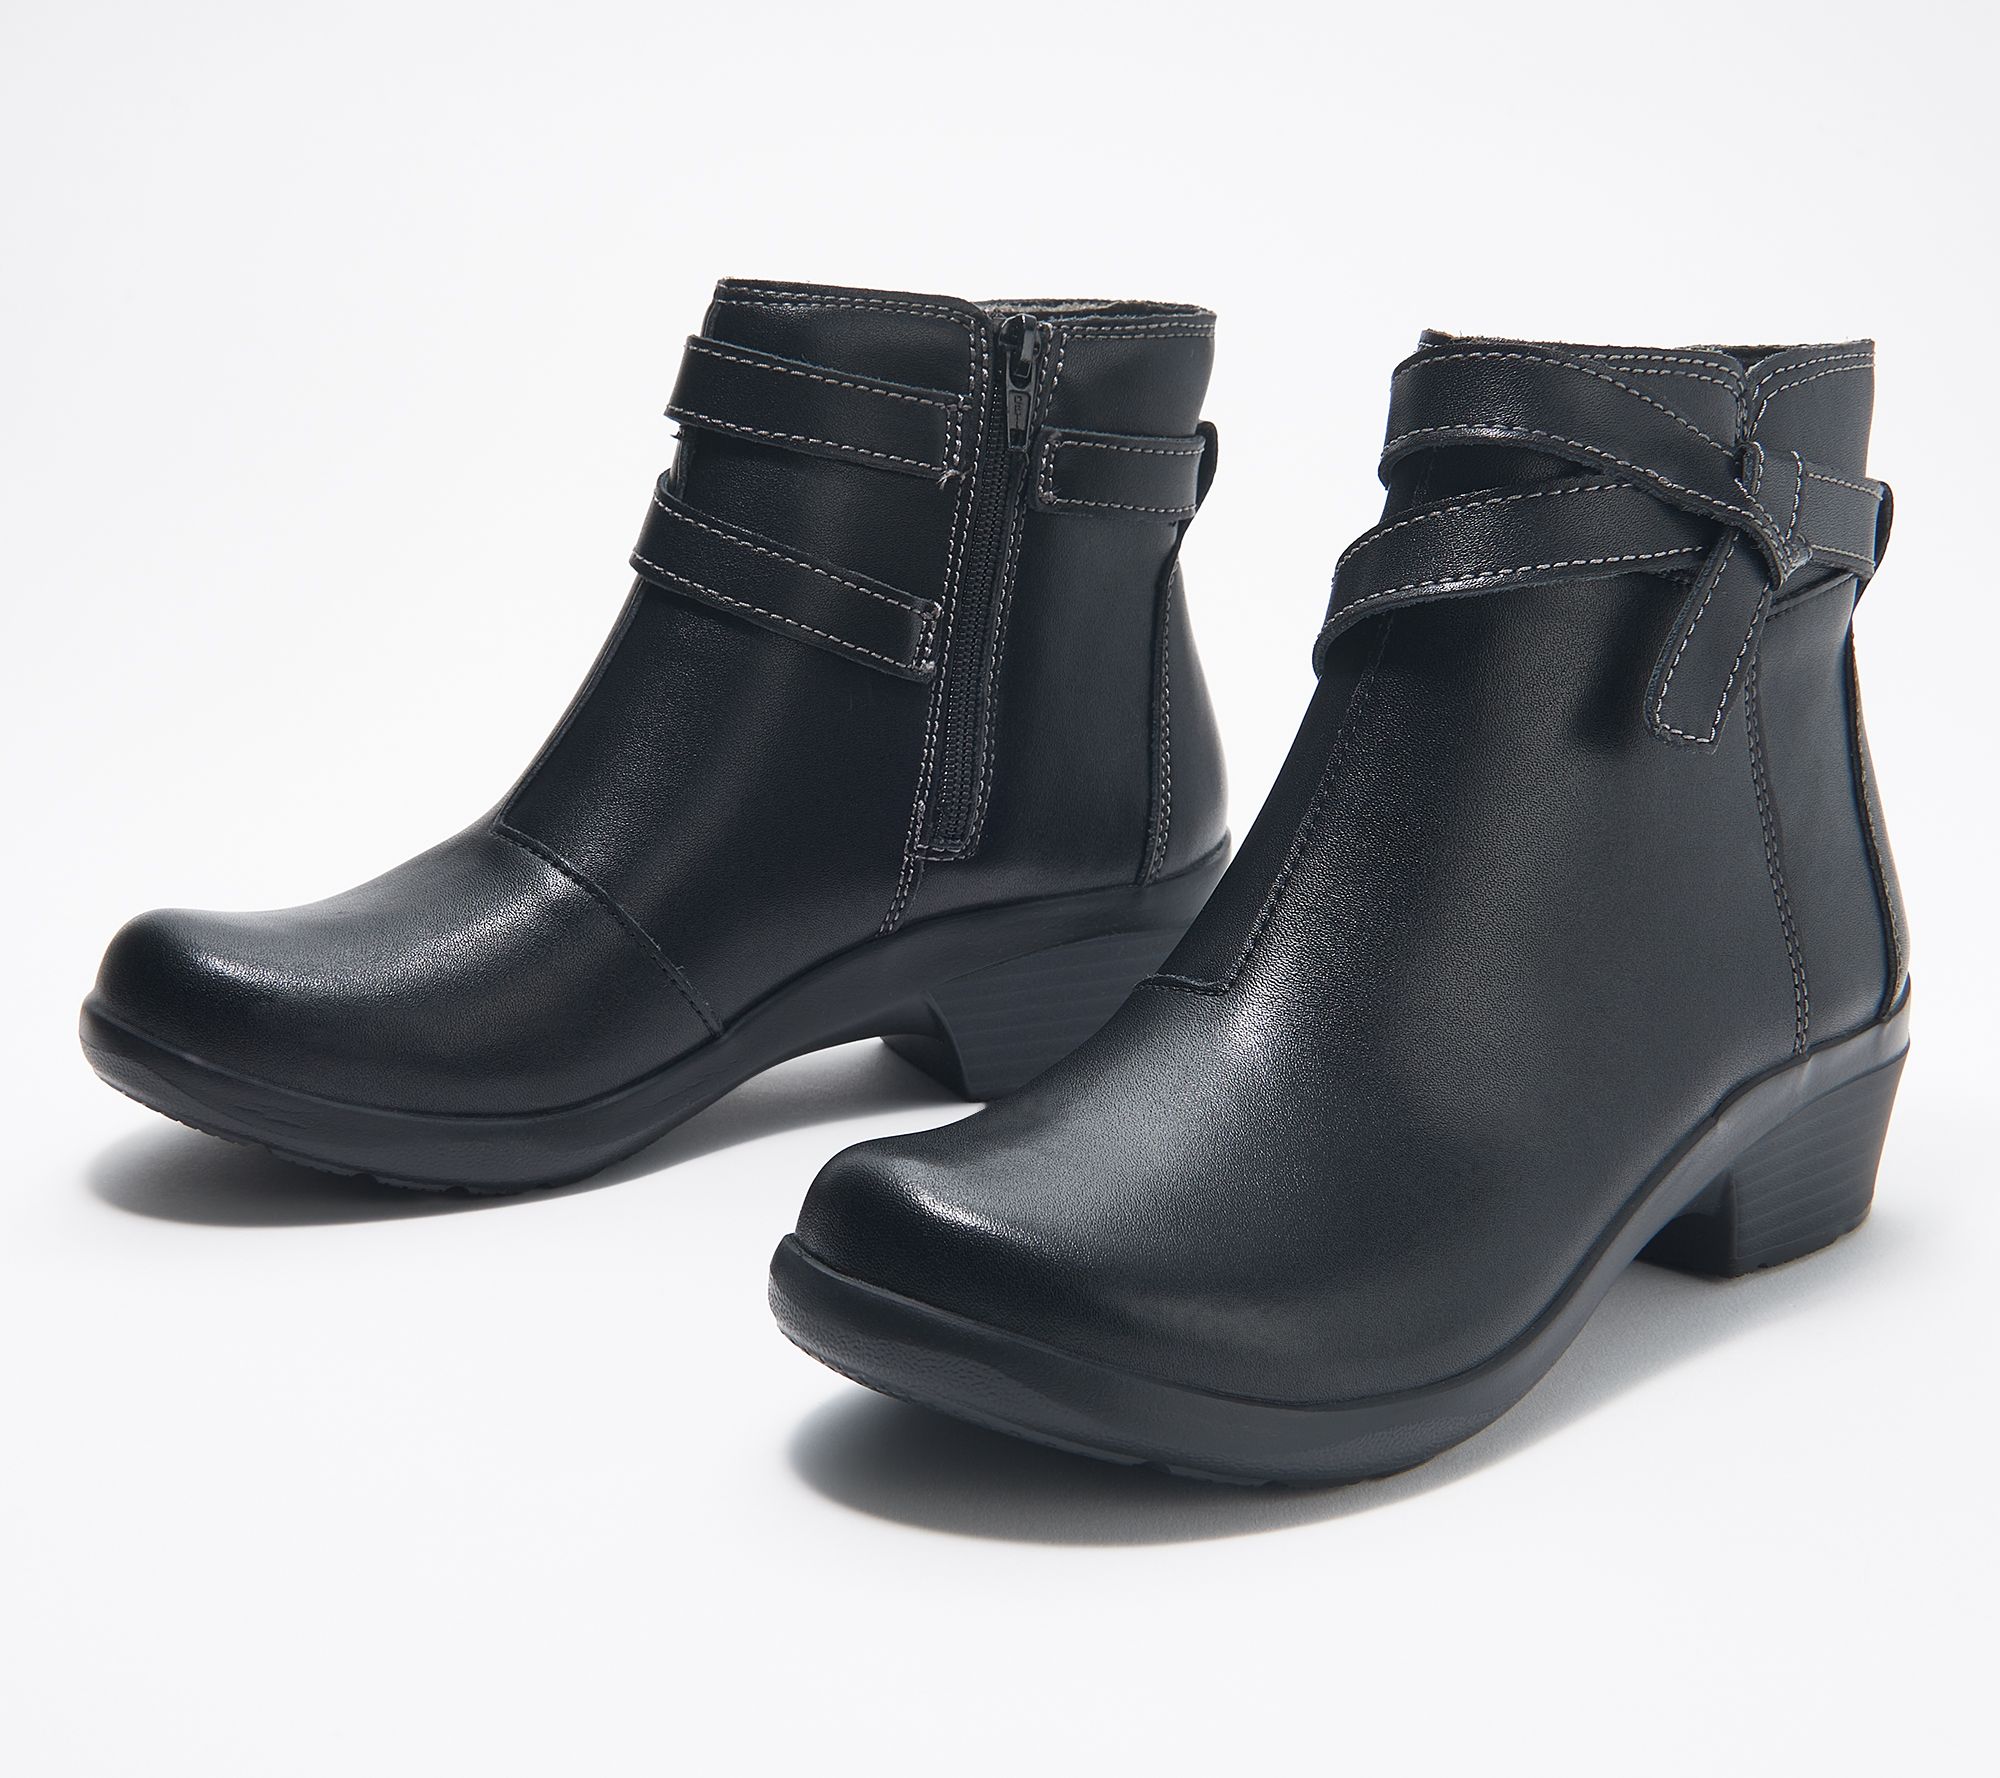 Clarks Collection Leather Ankle Boots - Angie Spice - QVC.com